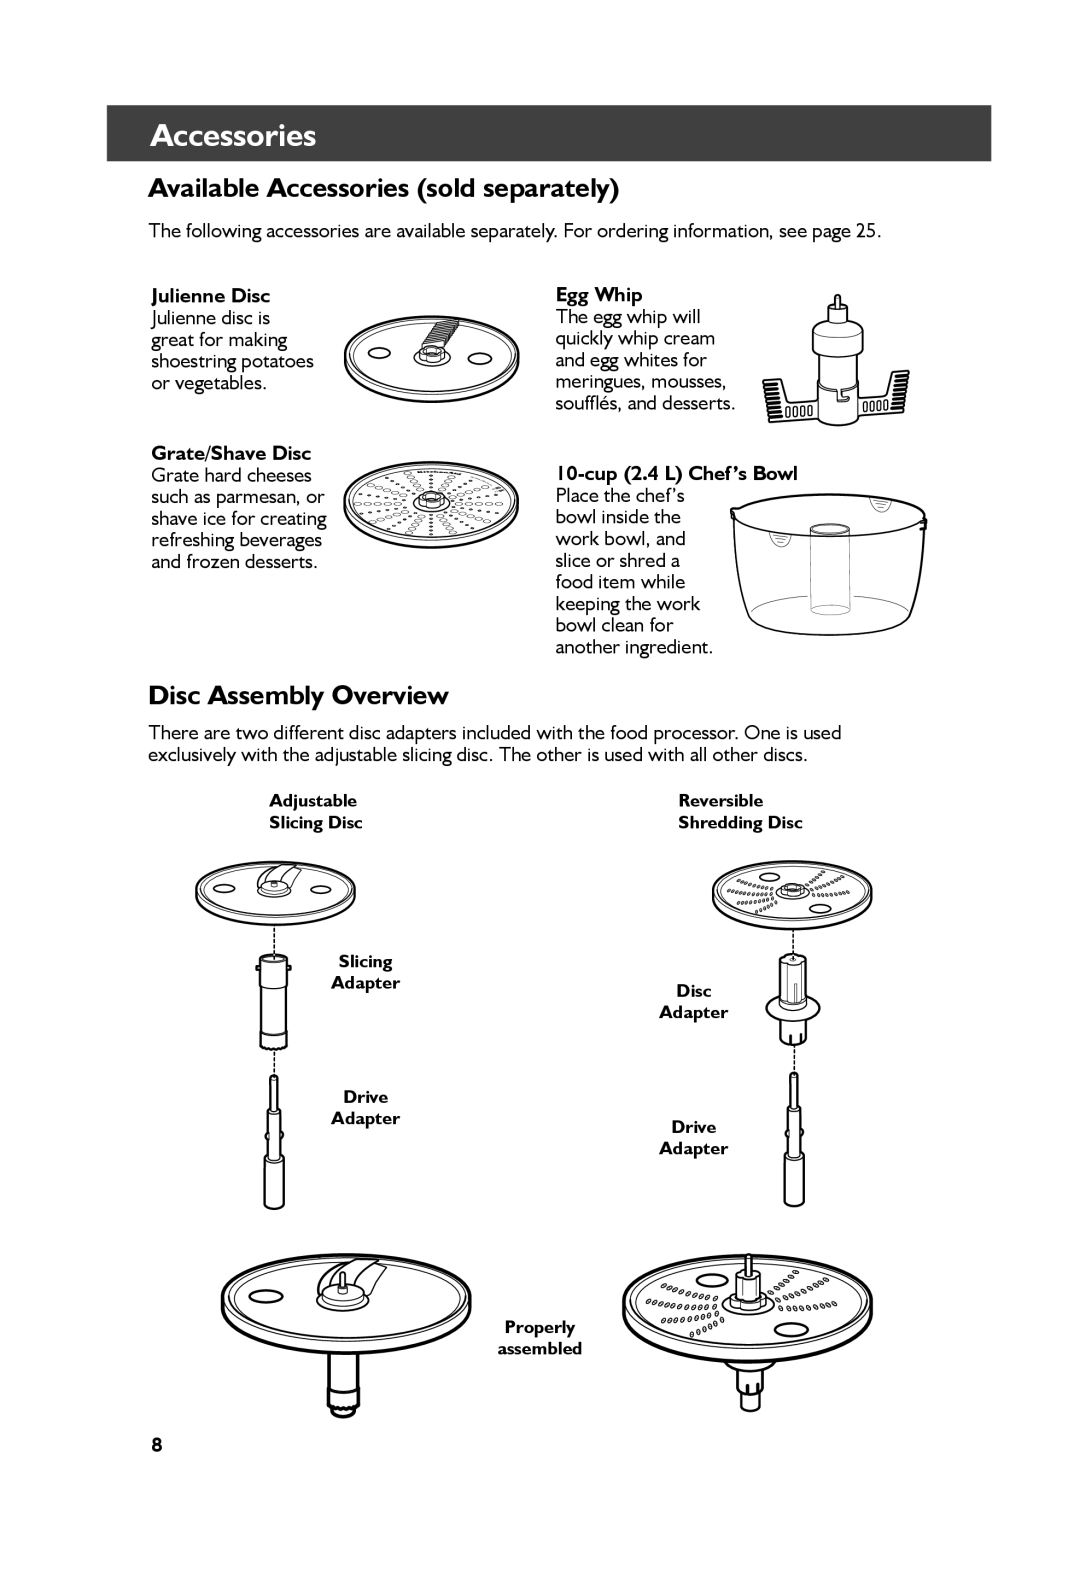 KitchenAid KFP1333, KFP1344 Available Accessories sold separately, Disc Assembly Overview, Grate/Shave Disc, Egg Whip 